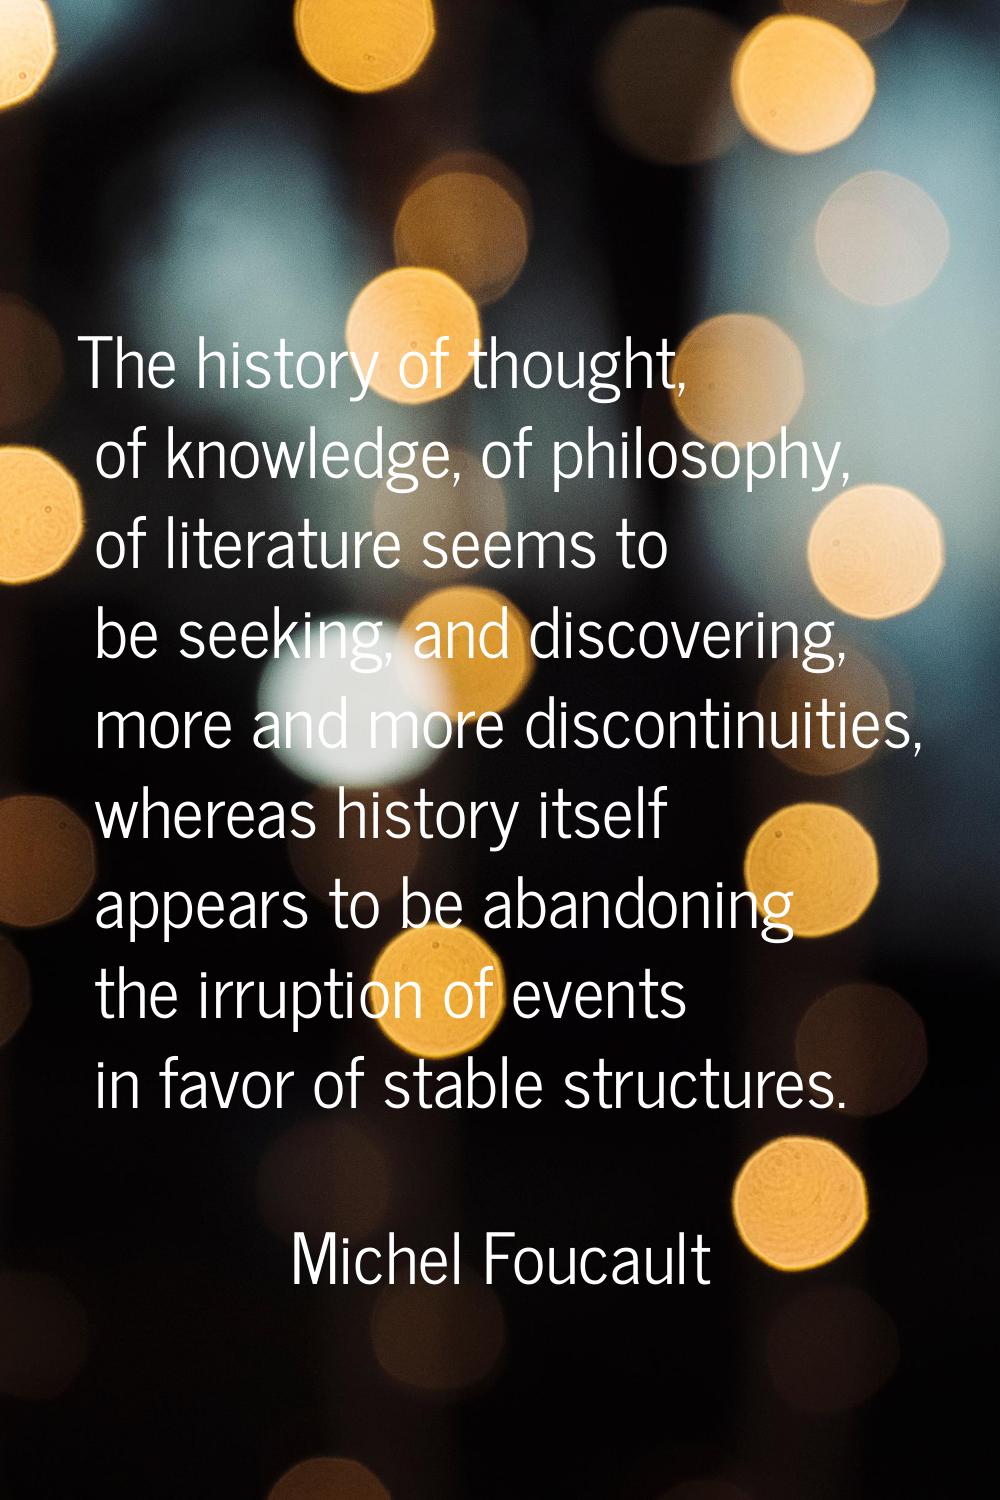 The history of thought, of knowledge, of philosophy, of literature seems to be seeking, and discove